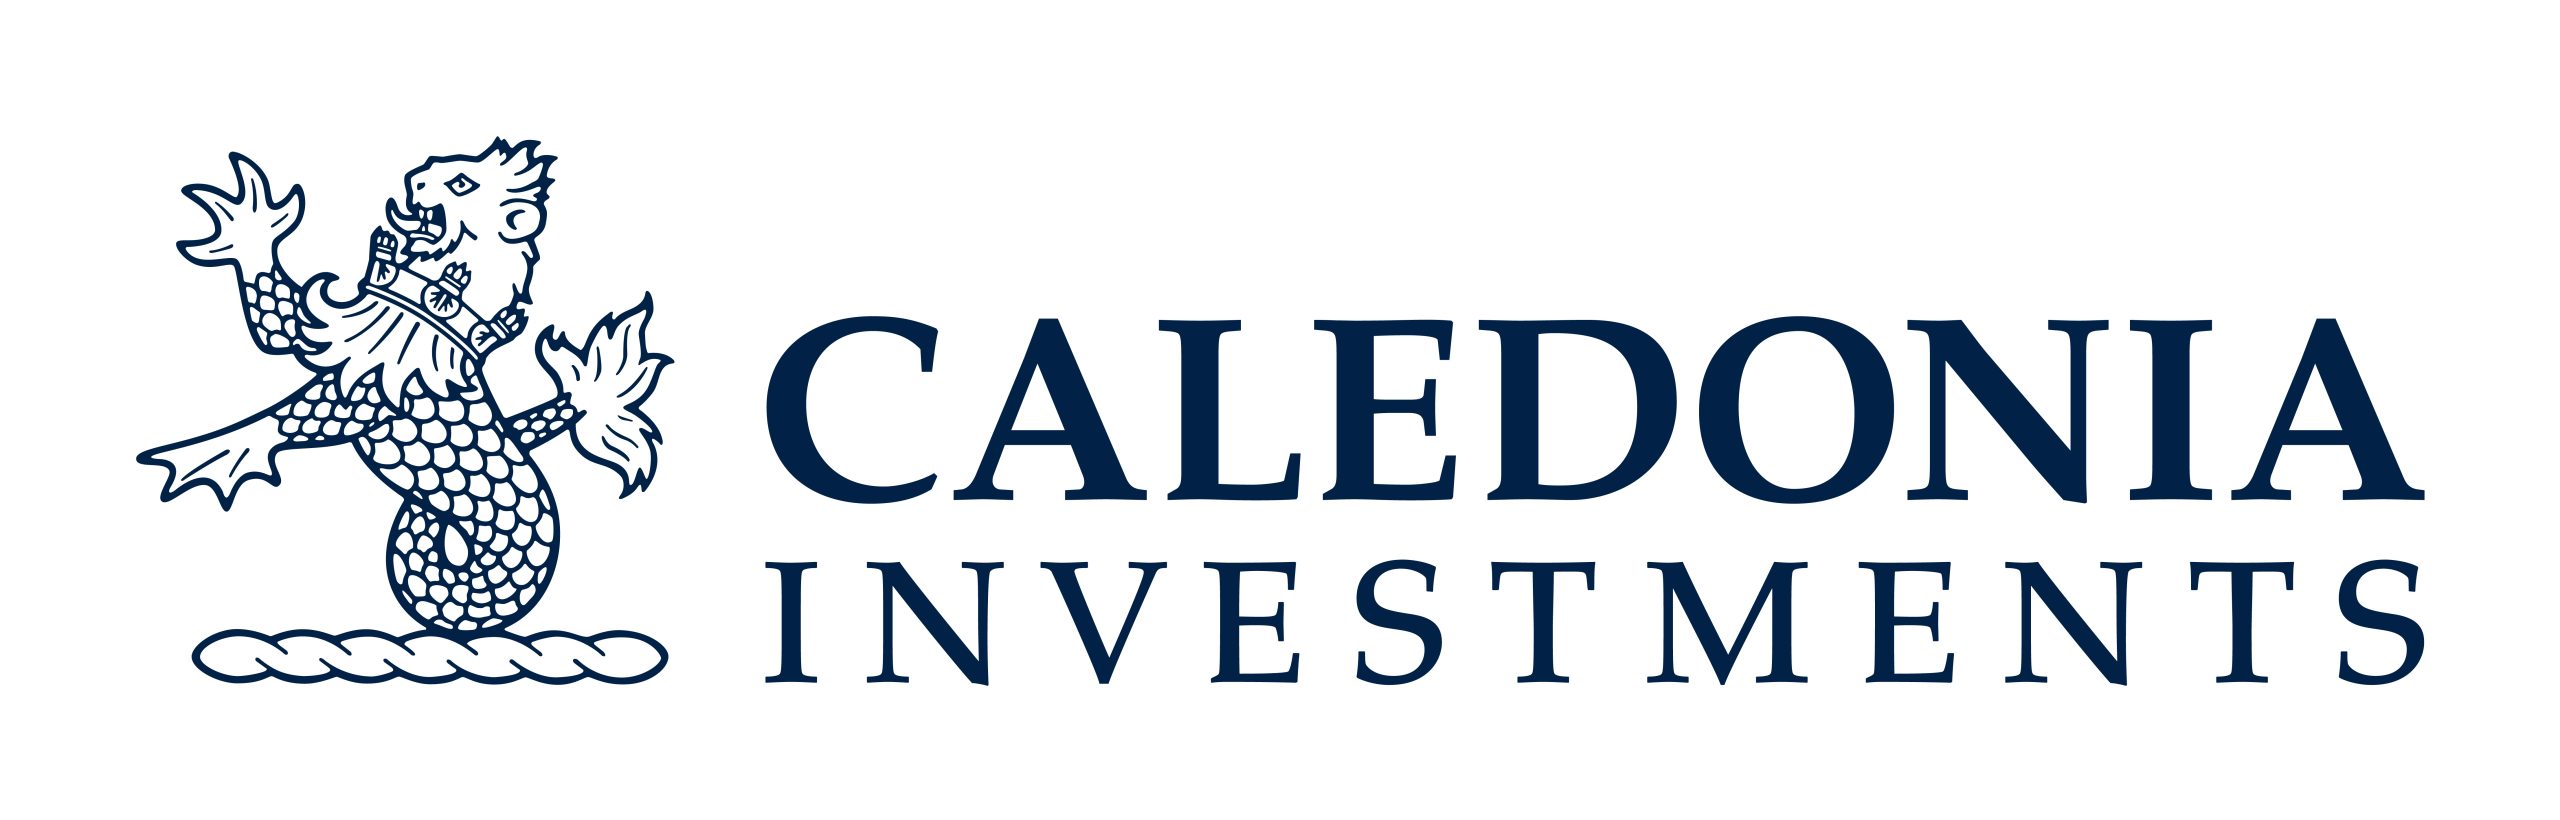 Caledonia Investments